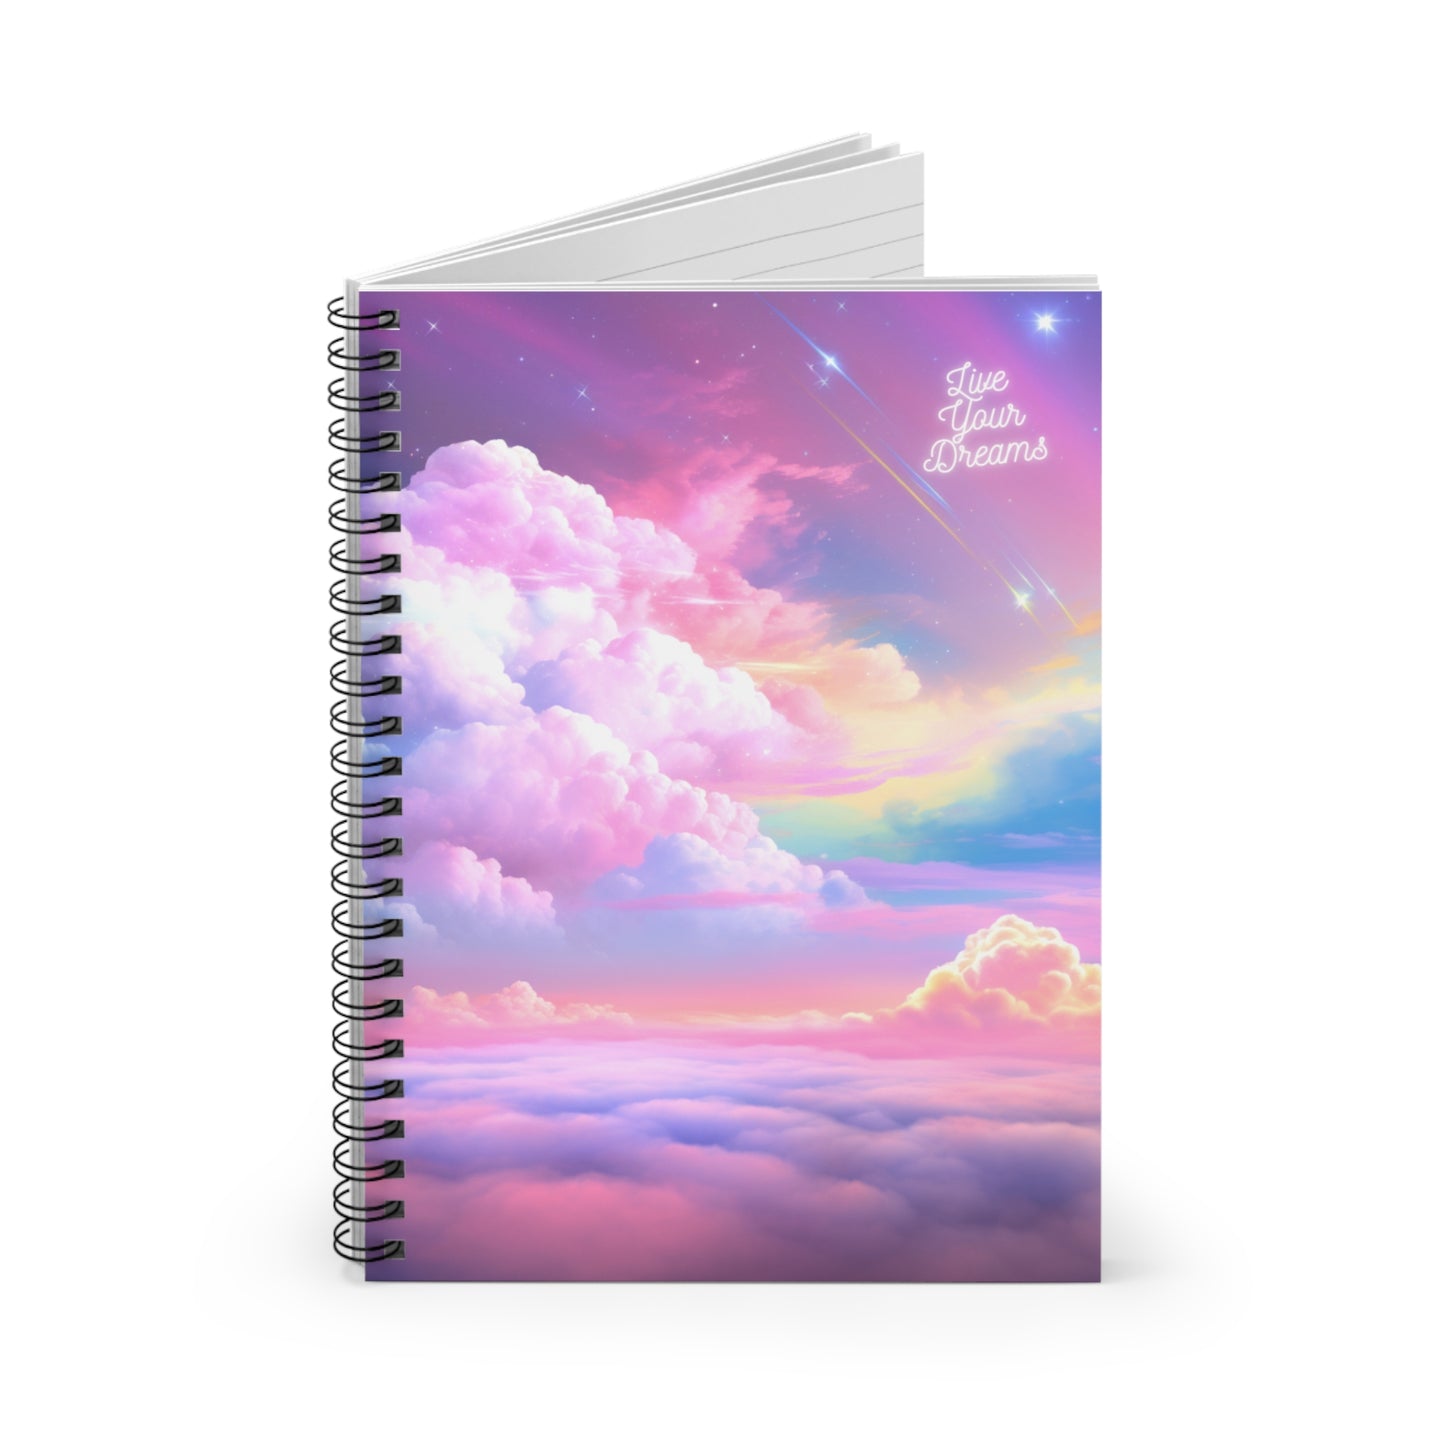 Rainbow Dreams Spiral Notebook Ruled Line From Big Fairy Tales By Schatar